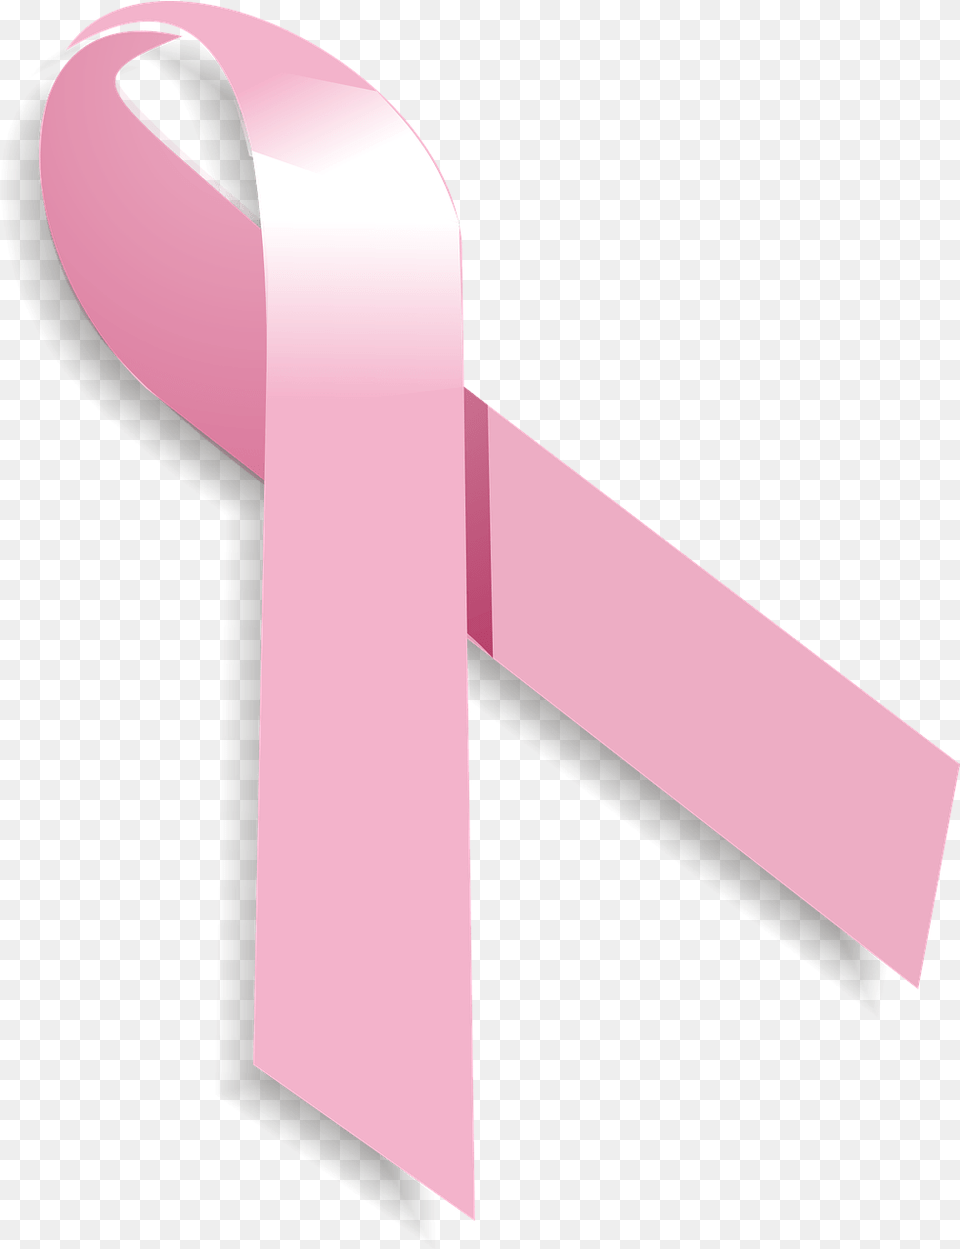 Ribbon Rosa Cancer, Accessories, Formal Wear, Tie, Symbol Png Image